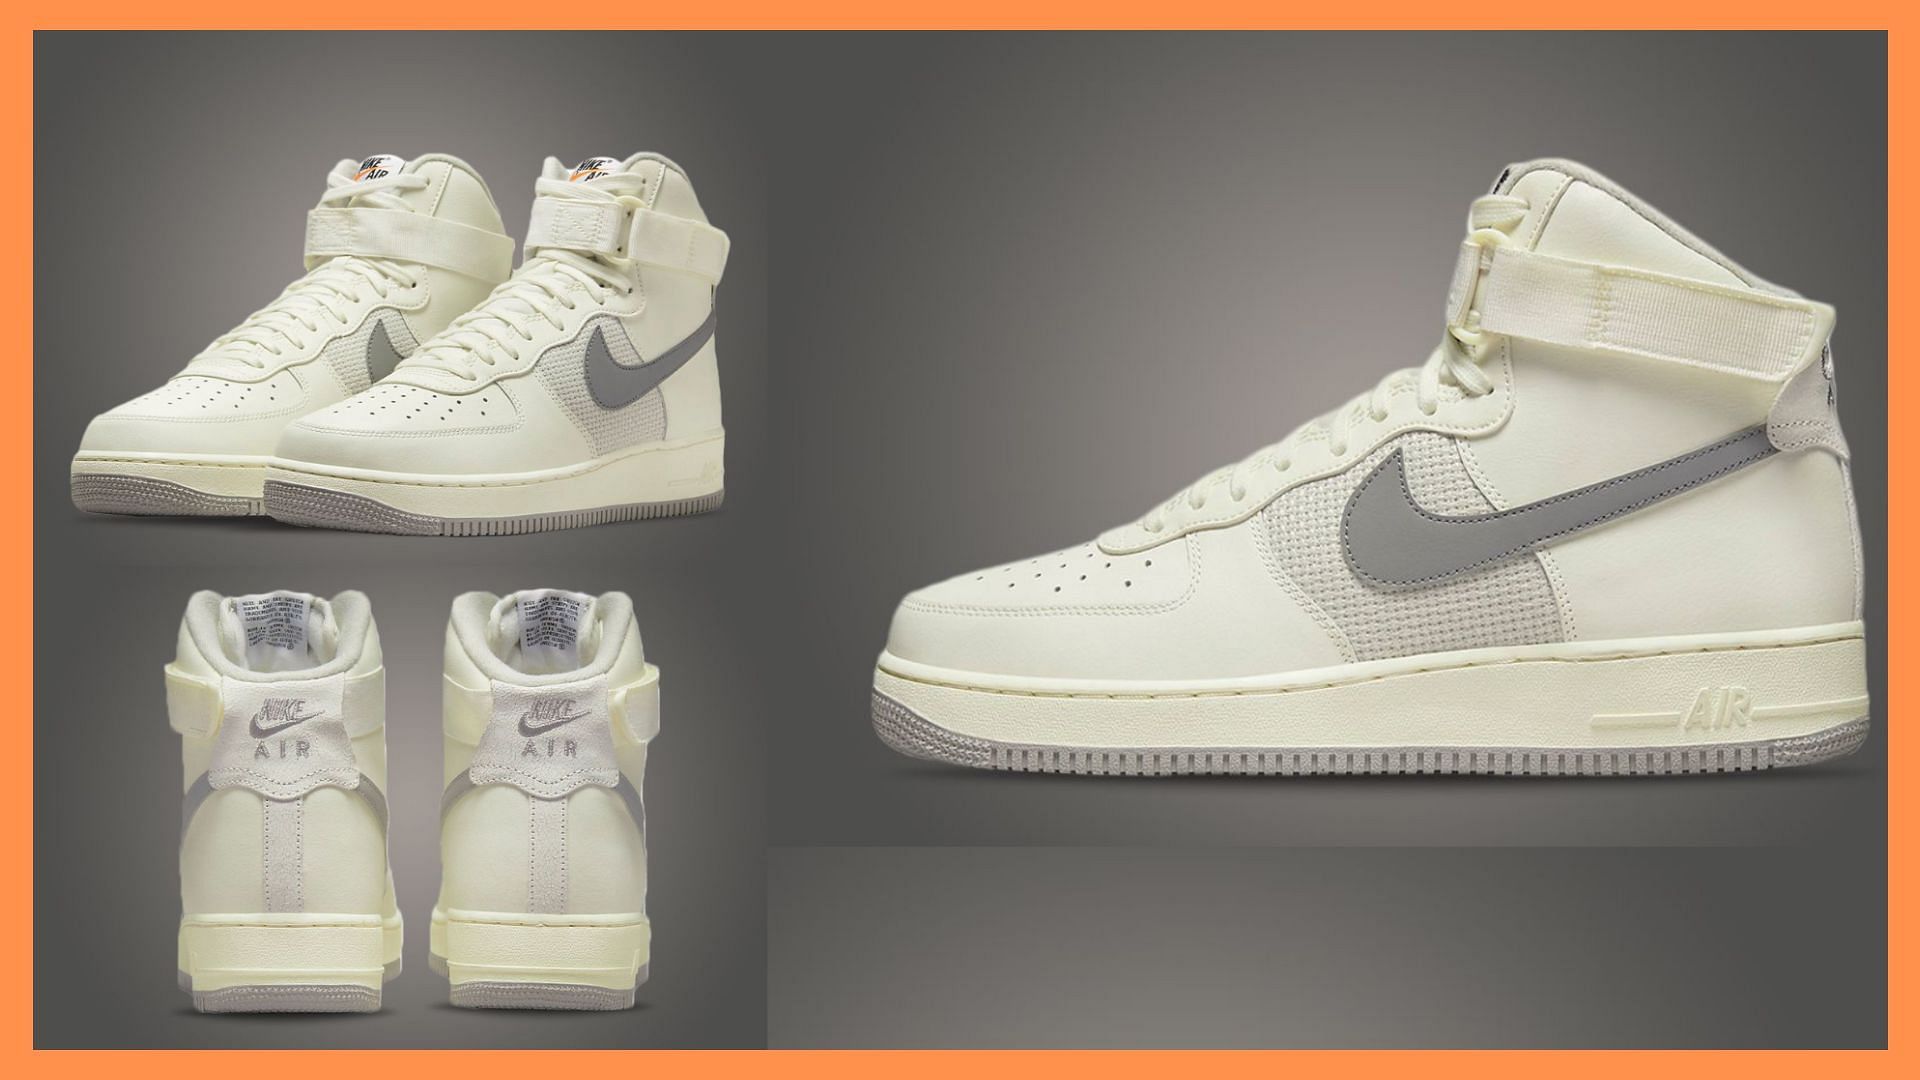 Where to buy Nike Air Force 1 High Vintage Sail shoes? Price, release date  and more details explored